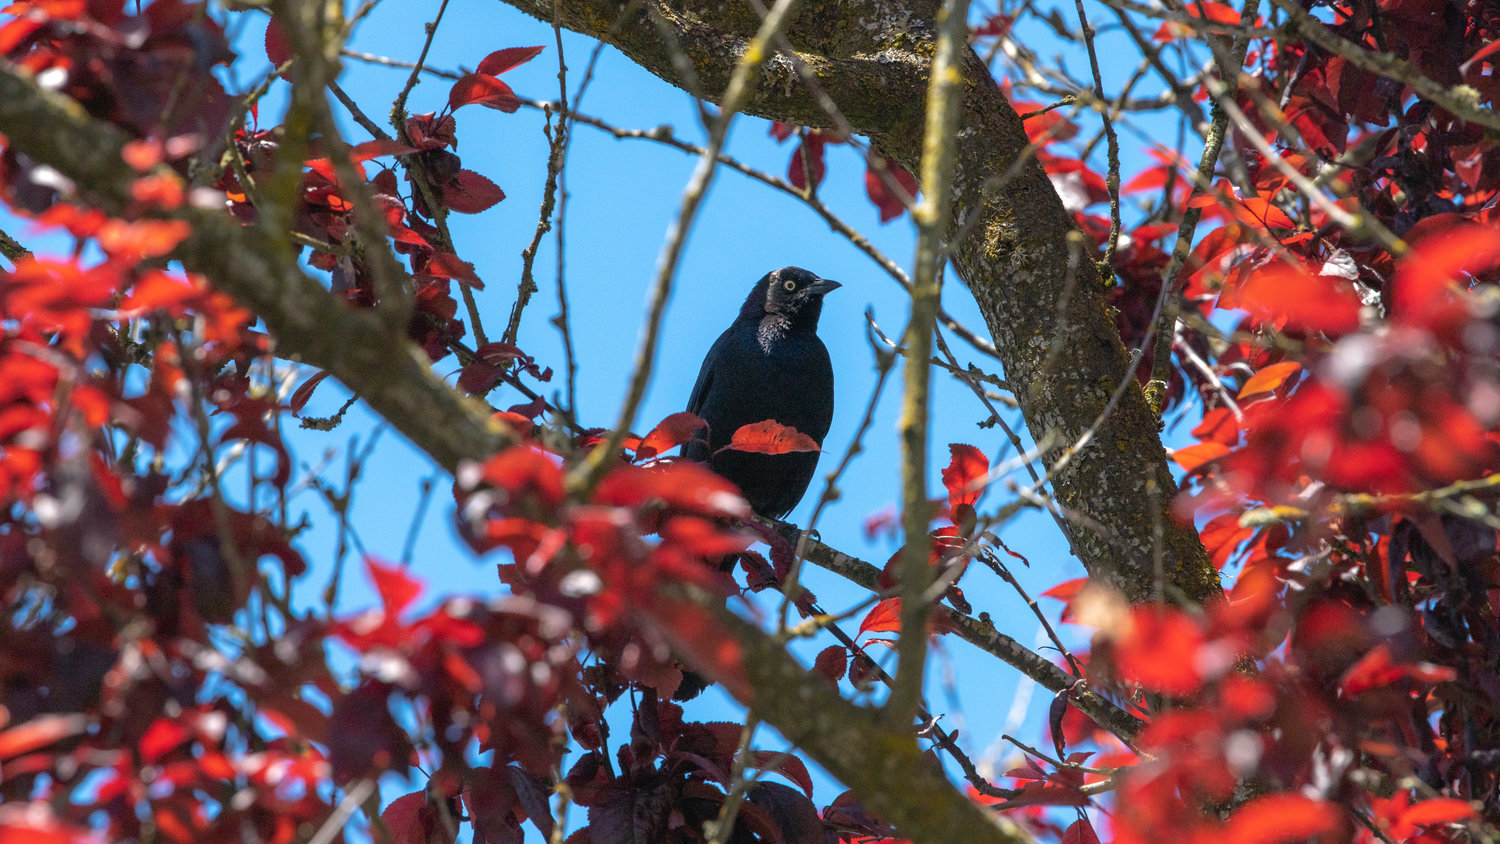 A Brewer’s blackbird looks on from a tree in front of Chehalis City Hall on Thursday.